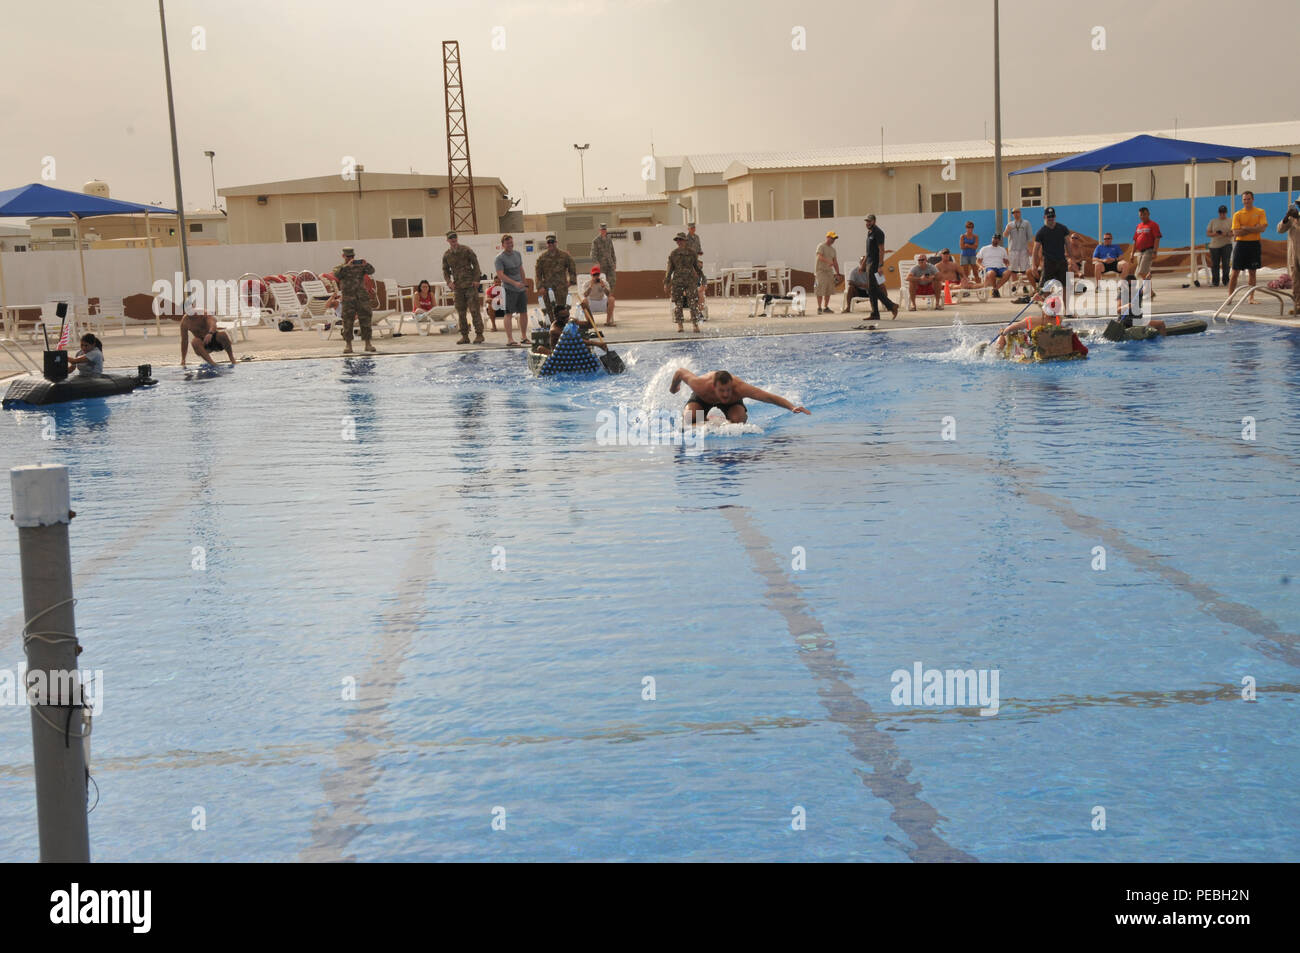 The Thanksgiving pool parade held at Coalition Compound at Al Udeid Air Base,  Qatar, was filled with service members who came out to support their team.  Music and cheers filled the air